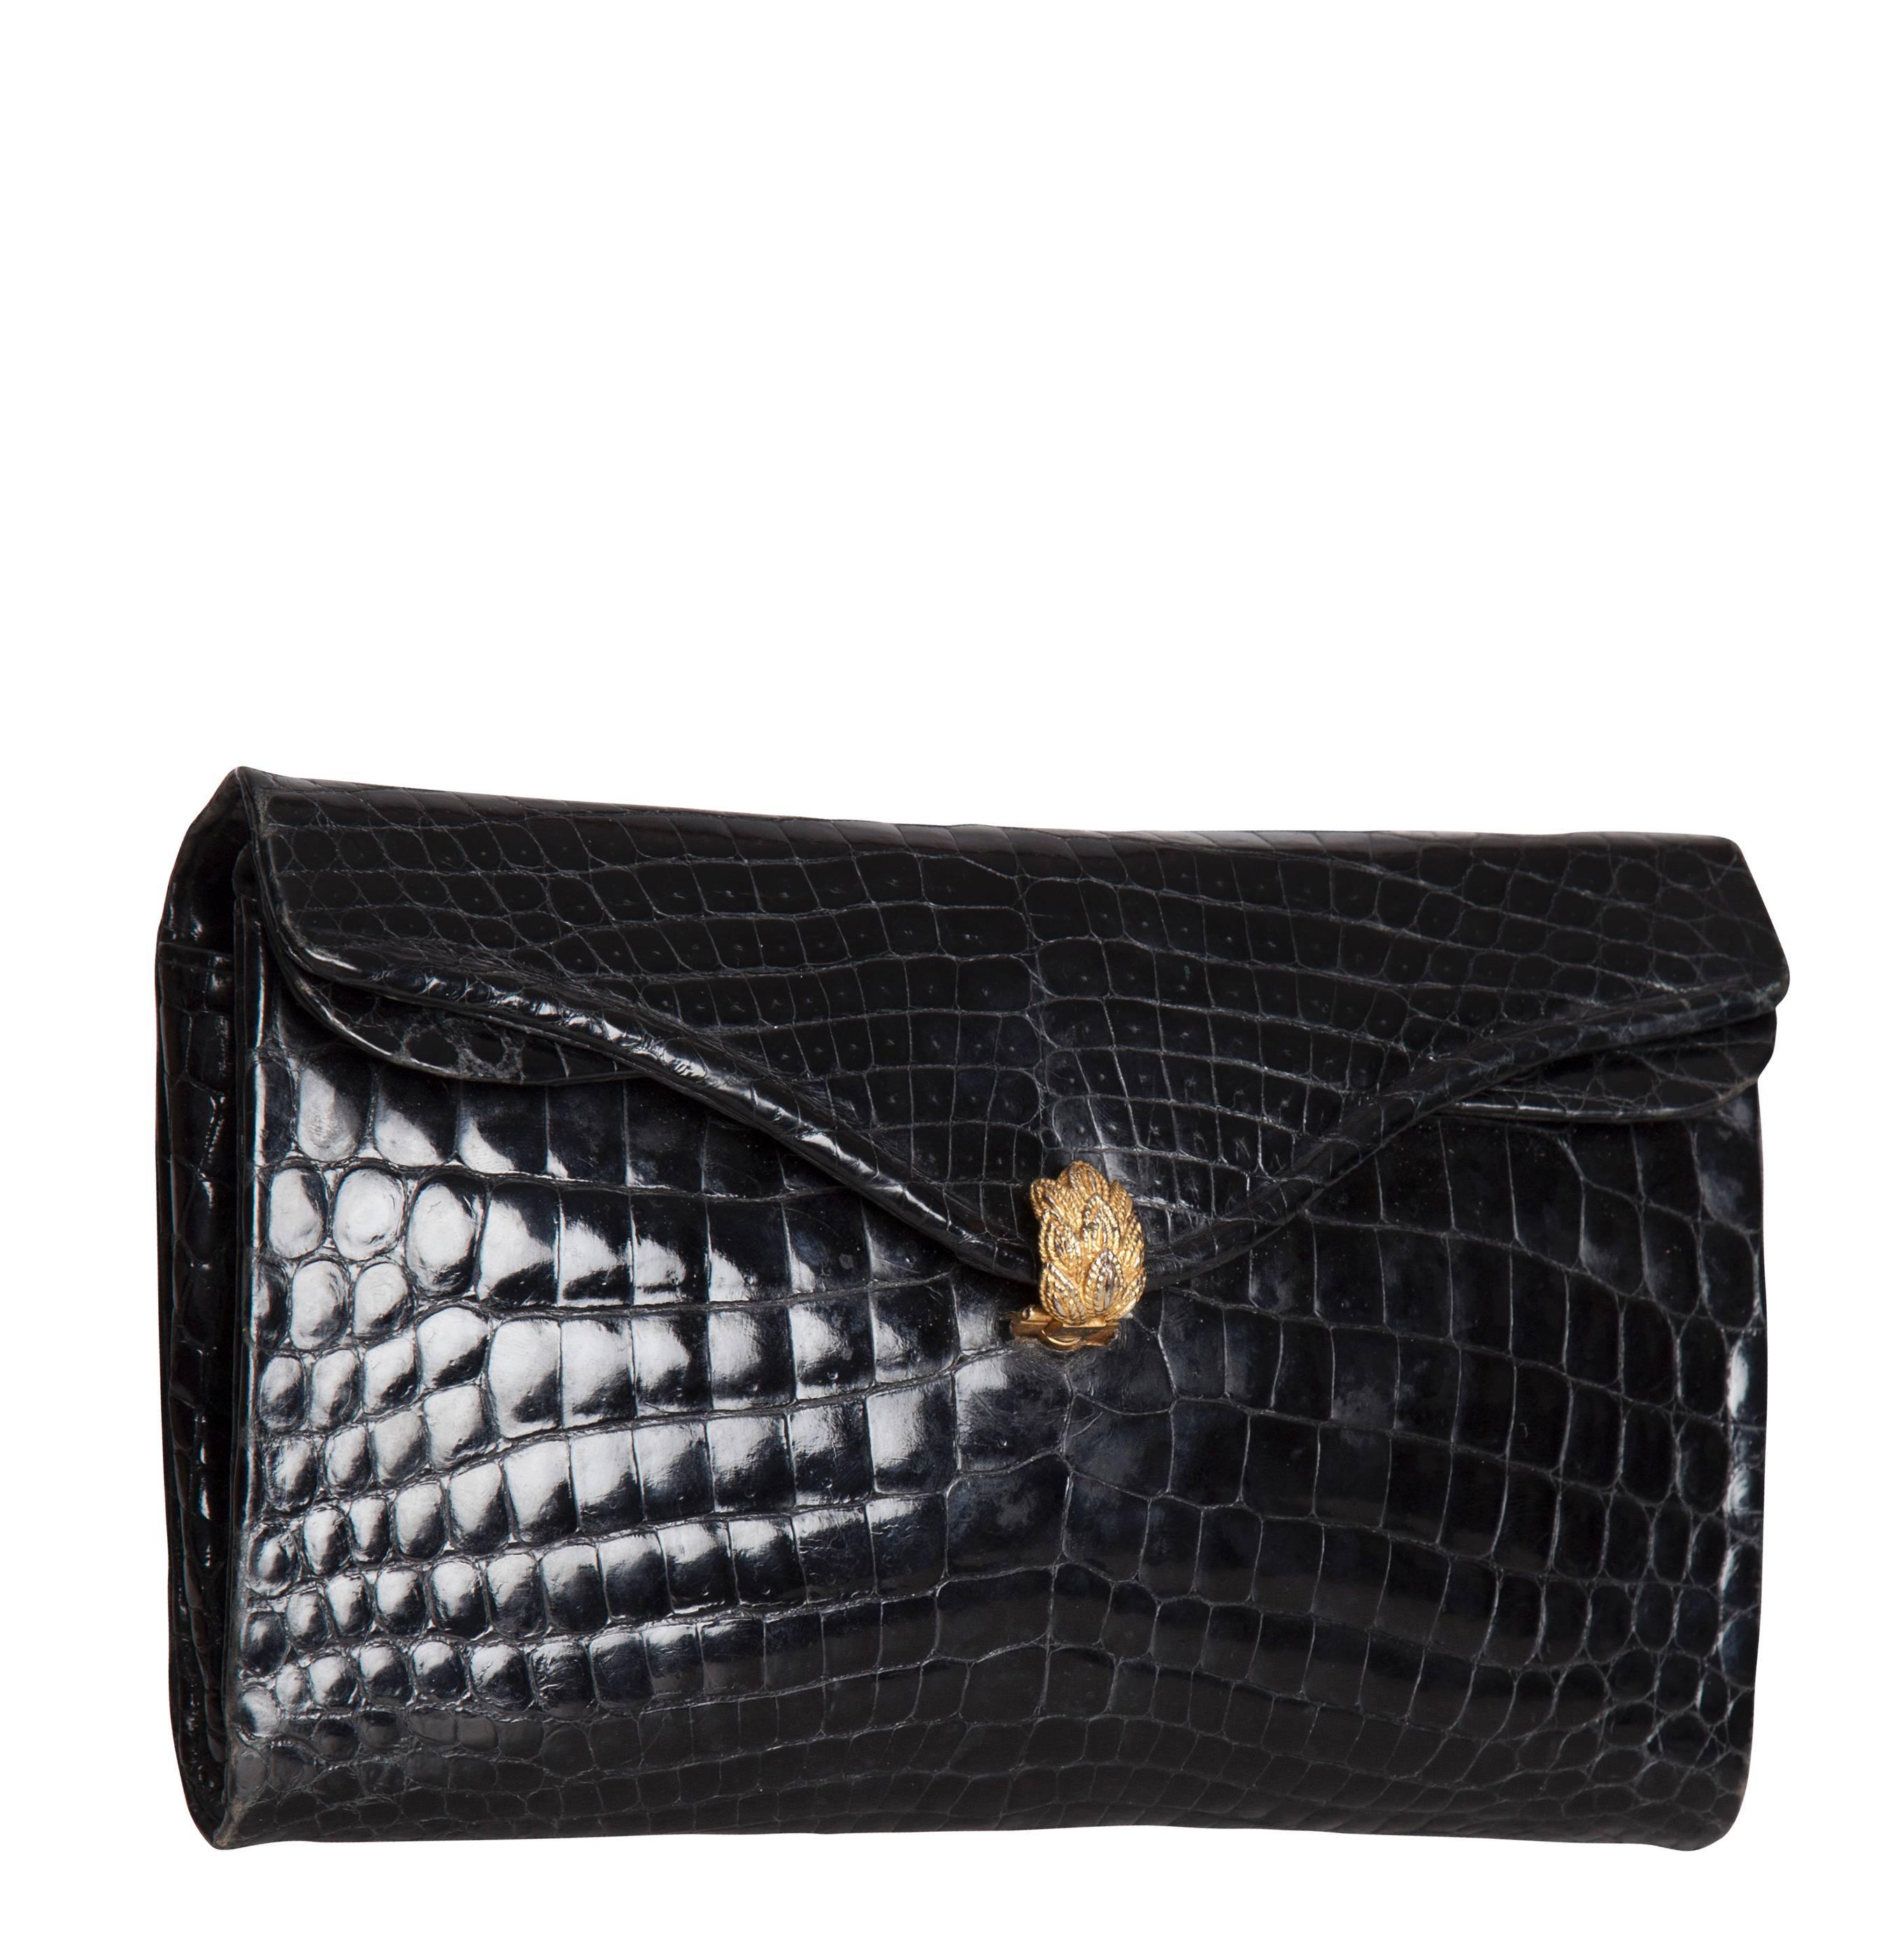 An elegant 1960s black crocodile skin envelope-shaped clutch bag from Parisian luxury leather goods brand Morabito. The bag fastens with a gold-toned curved clasp in the shape of a bunch of leaves. The black leather interior features a zippered